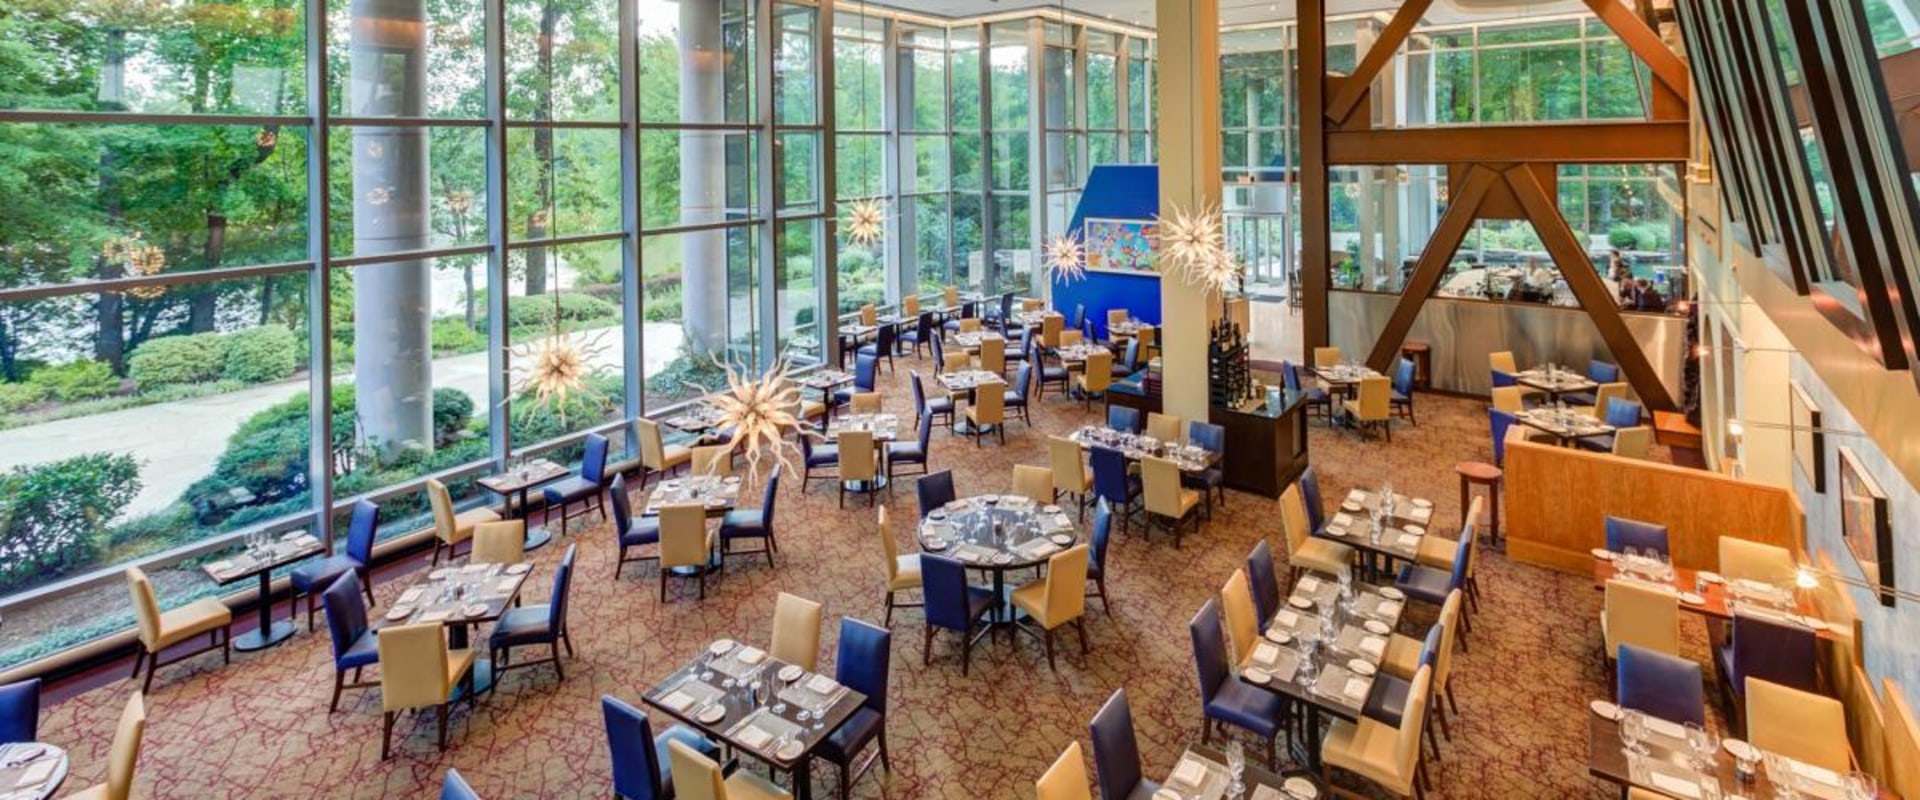 Discover Delicious All-You-Can-Eat Dining Options in Northern Virginia